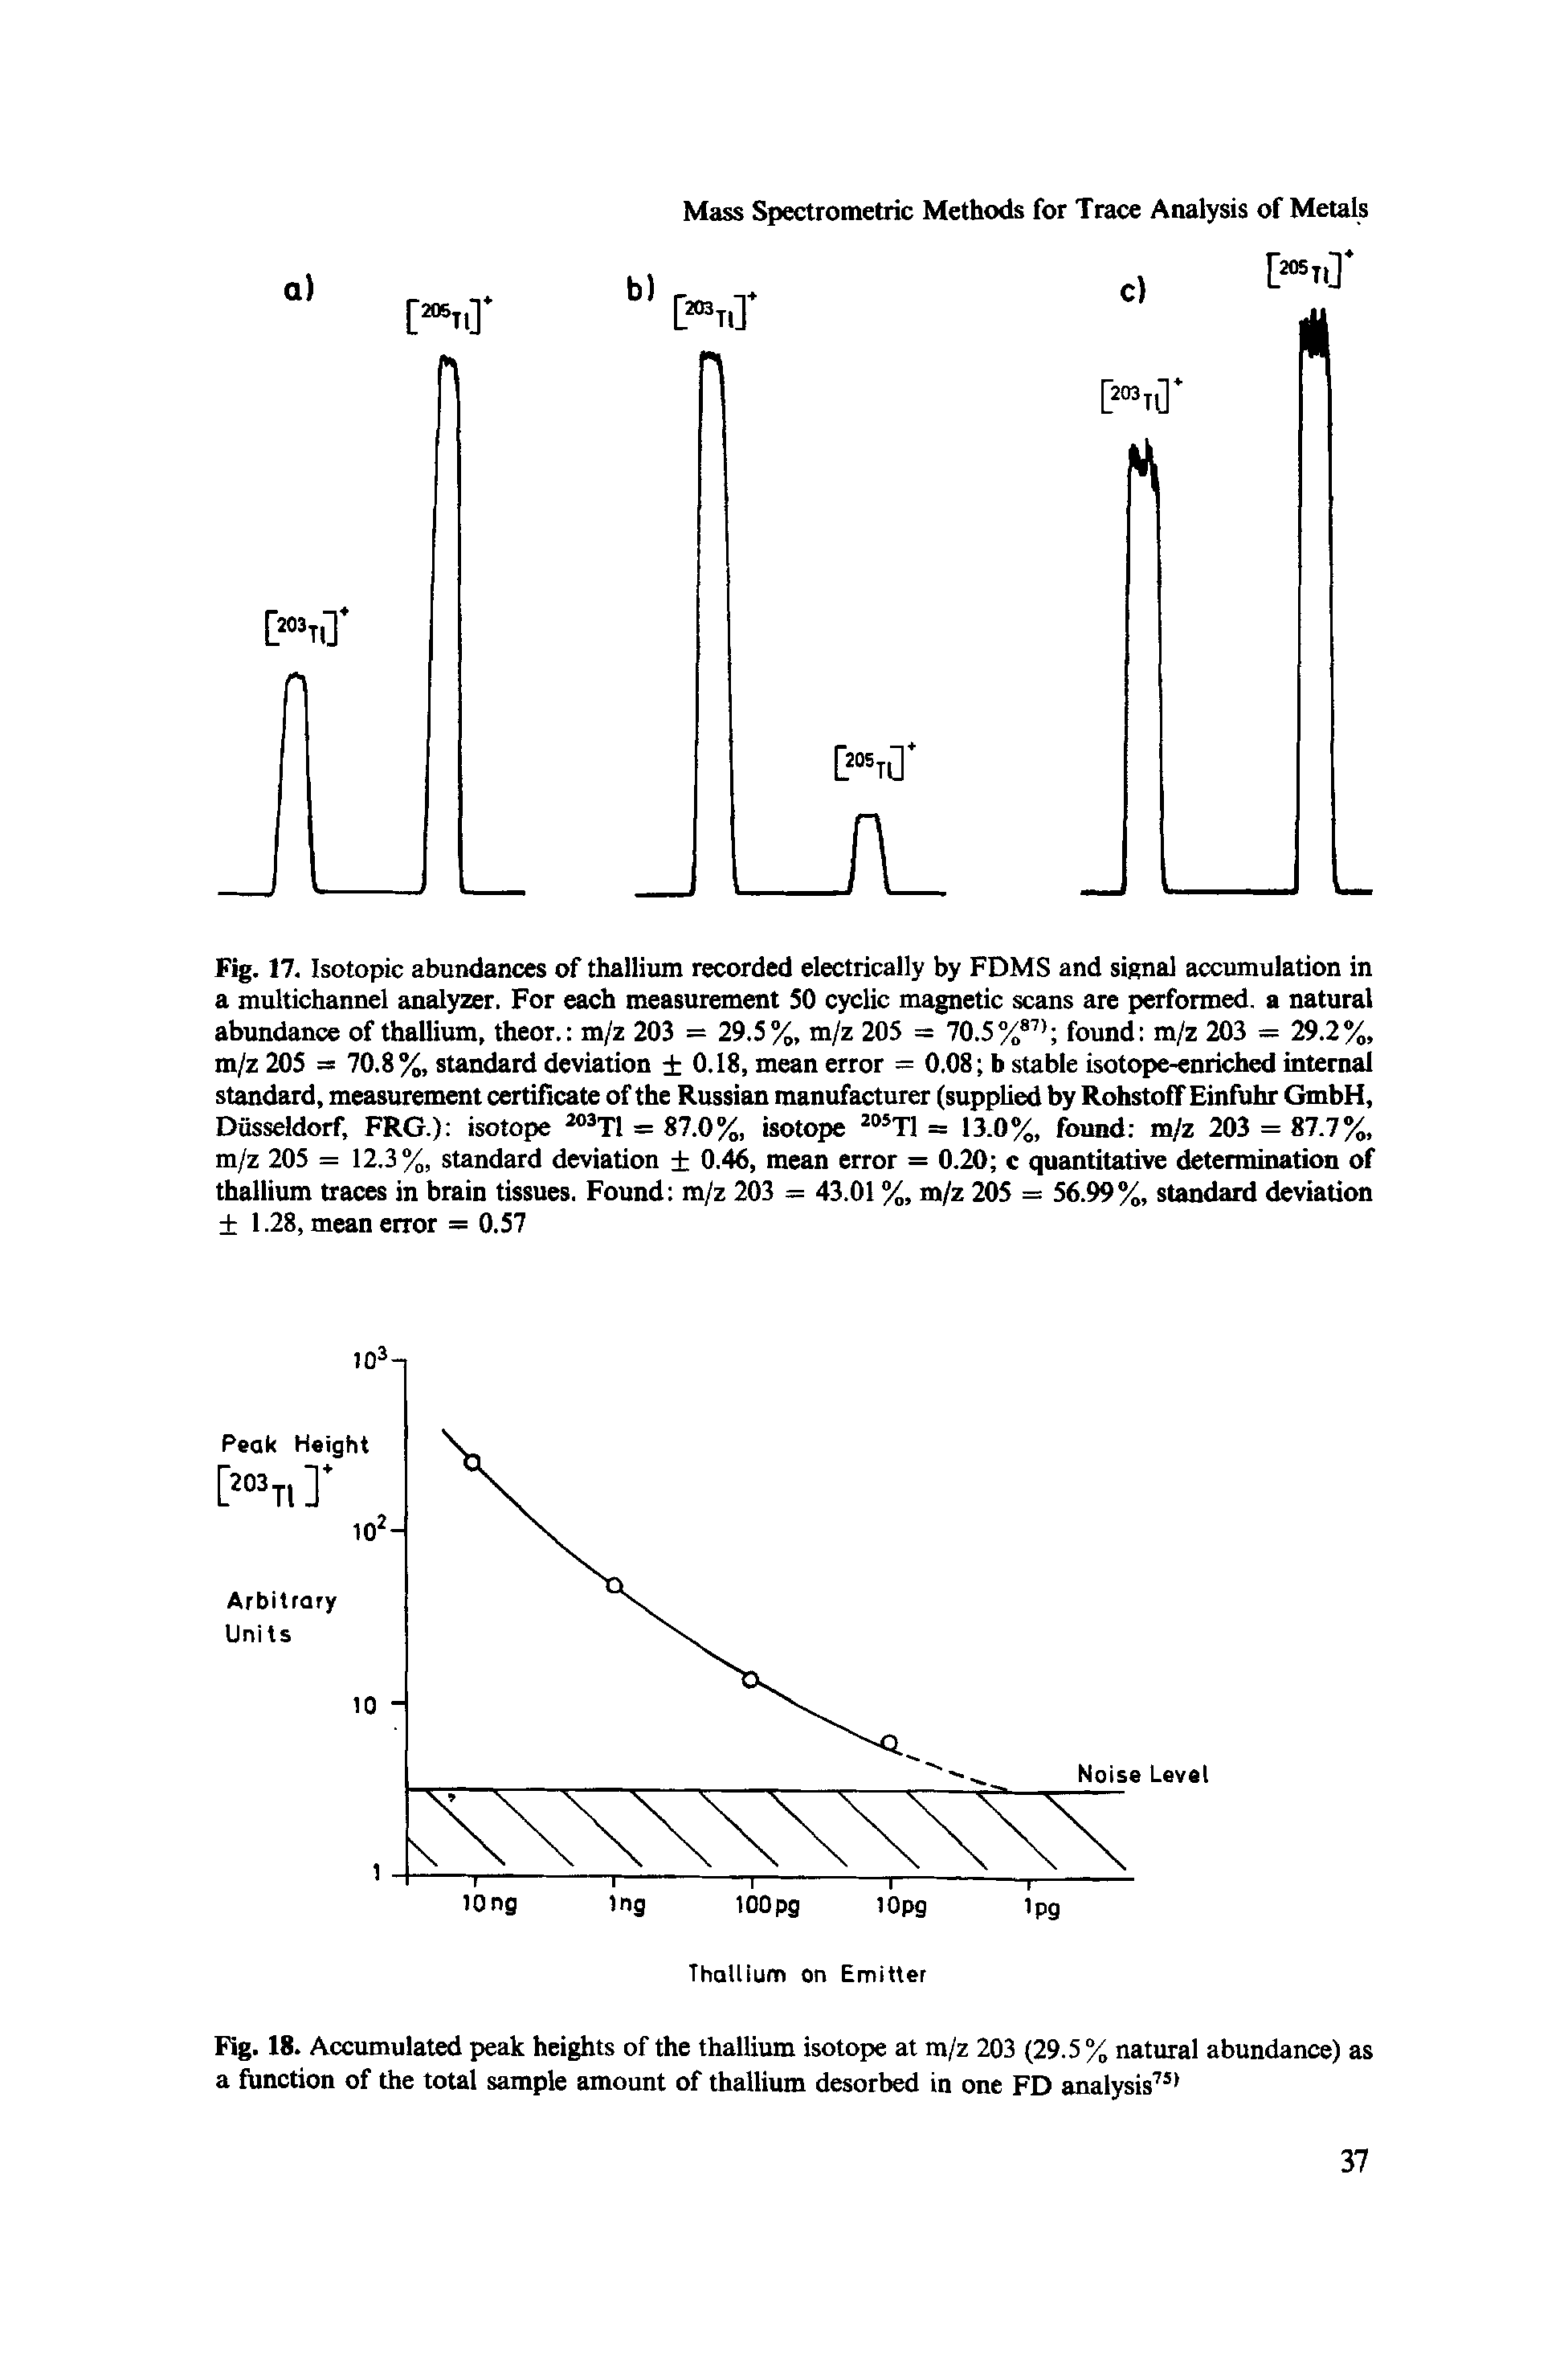 Fig. 17. Isotopic abundances of thallium recorded electrically by FDMS and signal accumulation in a multichannel analyzer. For each measurement SO cyclic magnetic scans are performed, a natural abundance of thallium, theor. m/z 203 = 29.5%, m/z 205 = 70.5% > found m/z 203 = 29.2%, m/z 205 = 70.S%, standard deviation 0.18, mean error = 0.08 b stable isotope-enriched internal standard, measurement certificate of the Russian manufacturer (supplied by RohstofTEinfuhr GmbH, Diisseldorf, FRG.) isotope T1 = 87.0%, isotope T1 = 13.0%, found m/z 203 = 87.7%, m/z 205 = 12.3%, standard deviation 0.46, mean error = 0.20 c quantitative determination of thallium traces in brain tissues. Found m/z 203 = 43.01 %, m/z 205 = 56.99%, standard deviation 1.28, mean error = 0.57...